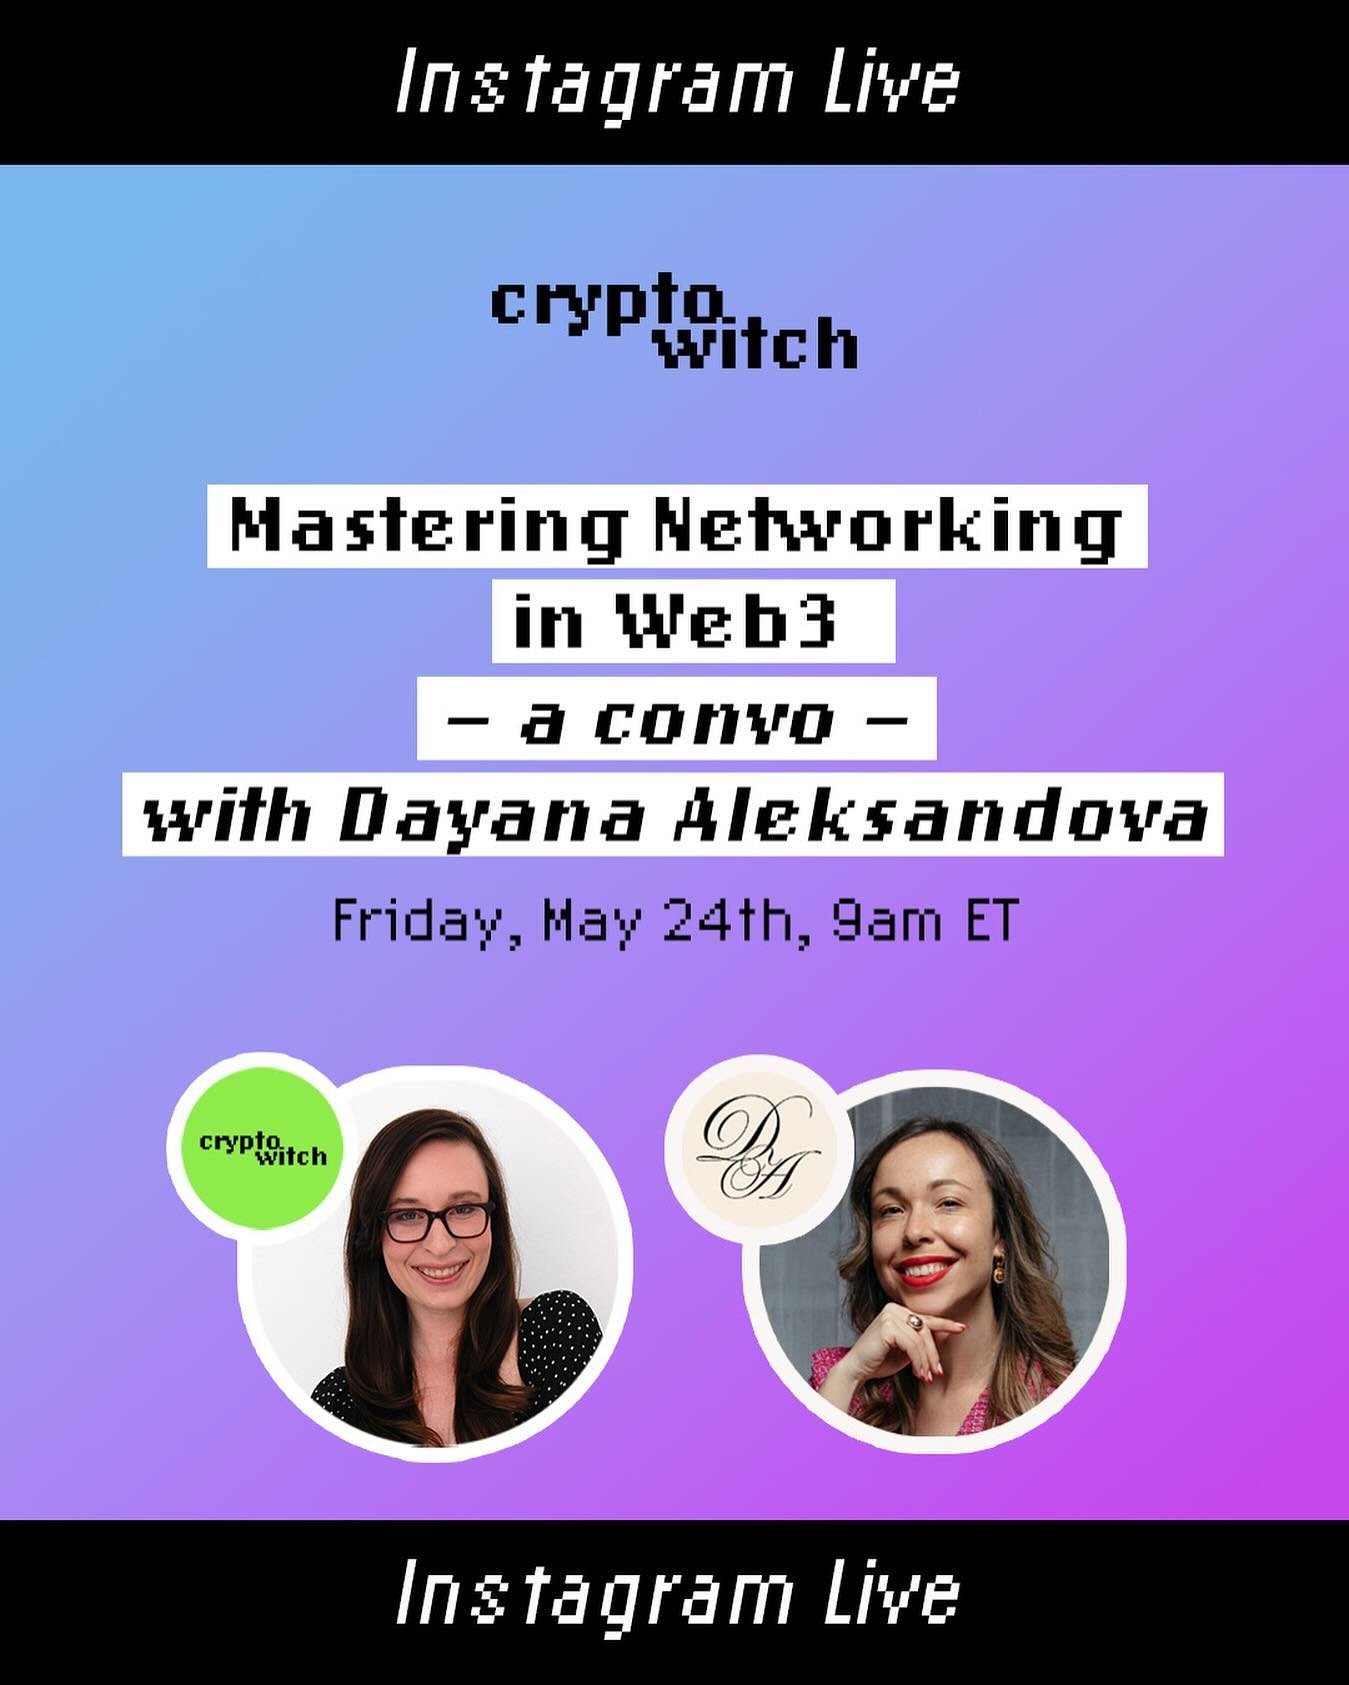 Set your reminder, witches! This Friday at 9am ET, we&rsquo;ll be on IG Live with the incredible @dayana_aleksandrova_, a Web3 event speaker and certified business coach, to demystify networking in Web3. @shirinbucknam and Dayana will be discussing ?